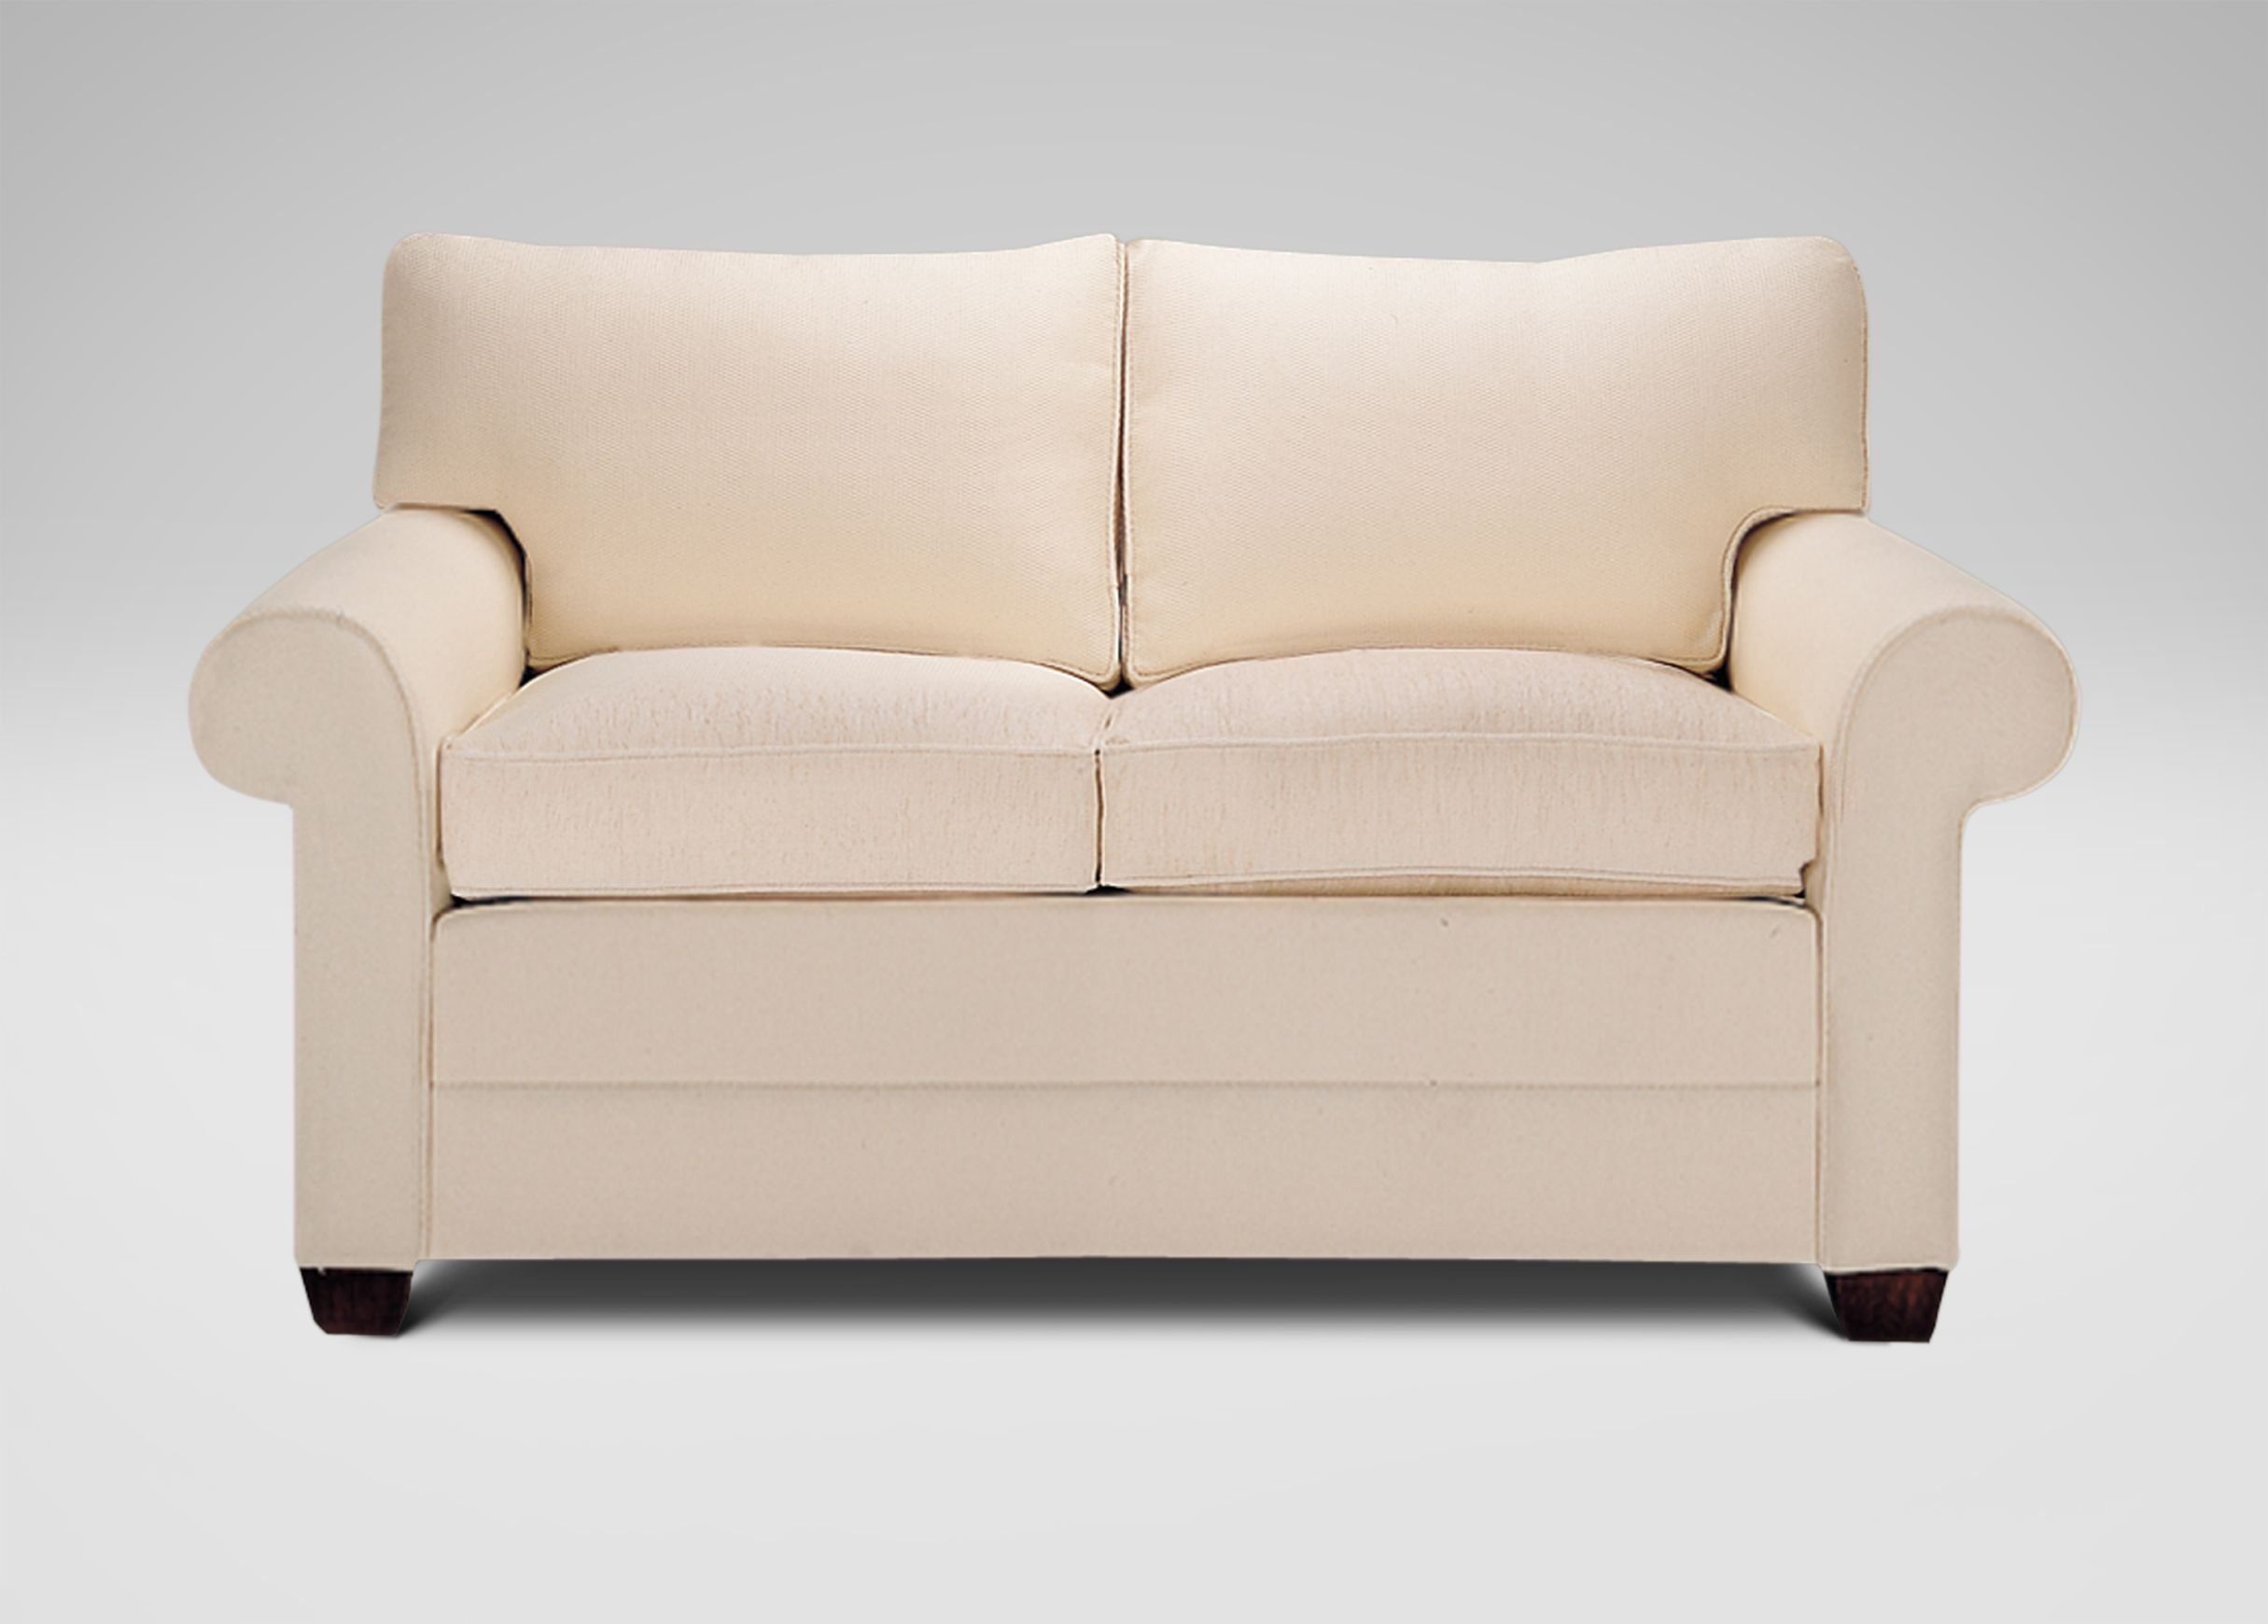 Bennett Roll Arm Loveseat Ethan Allen Throughout Ethan Allen Sofas And Chairs (View 14 of 15)